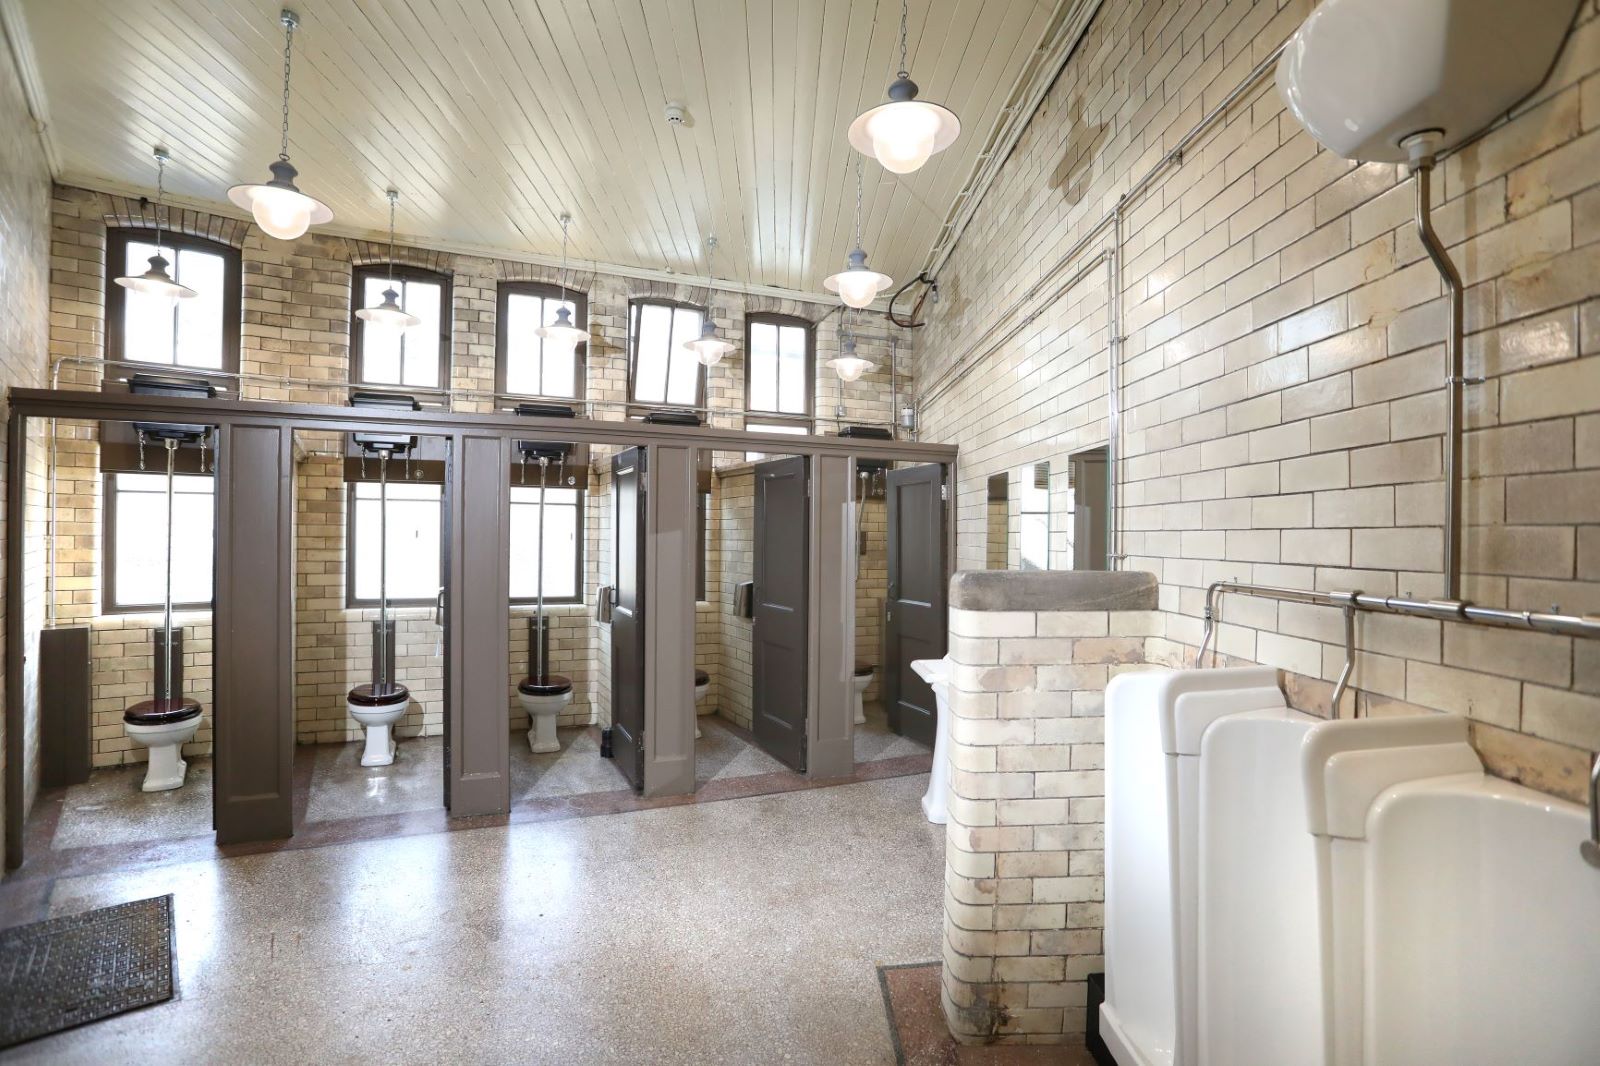 Historic Newcastle Central Station Facilities Restored